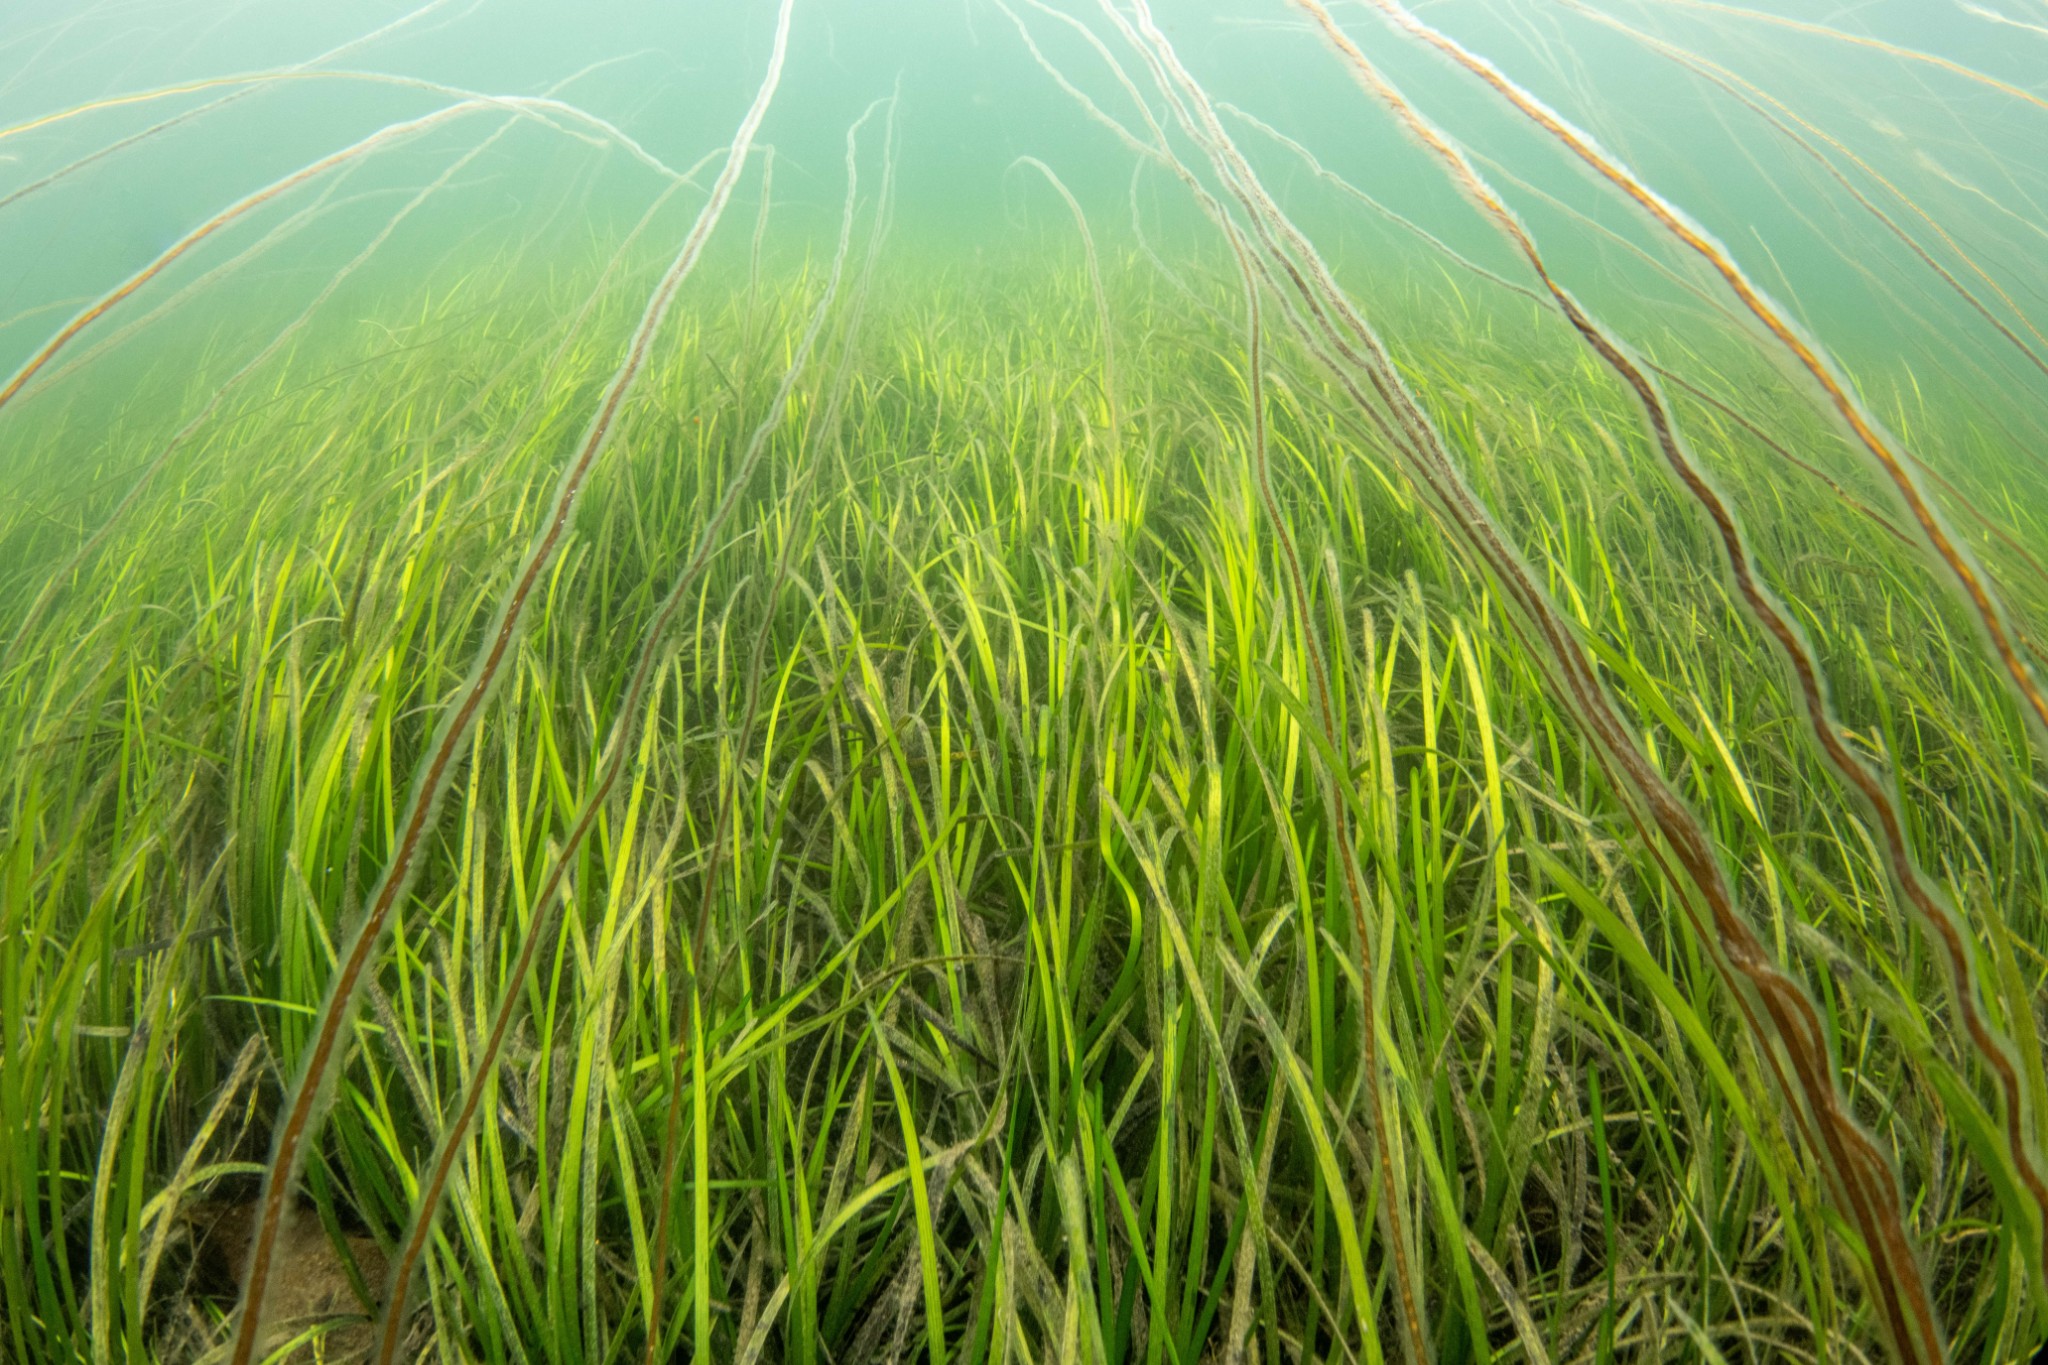 Seagrass in Orkney - images by Raymond Besant